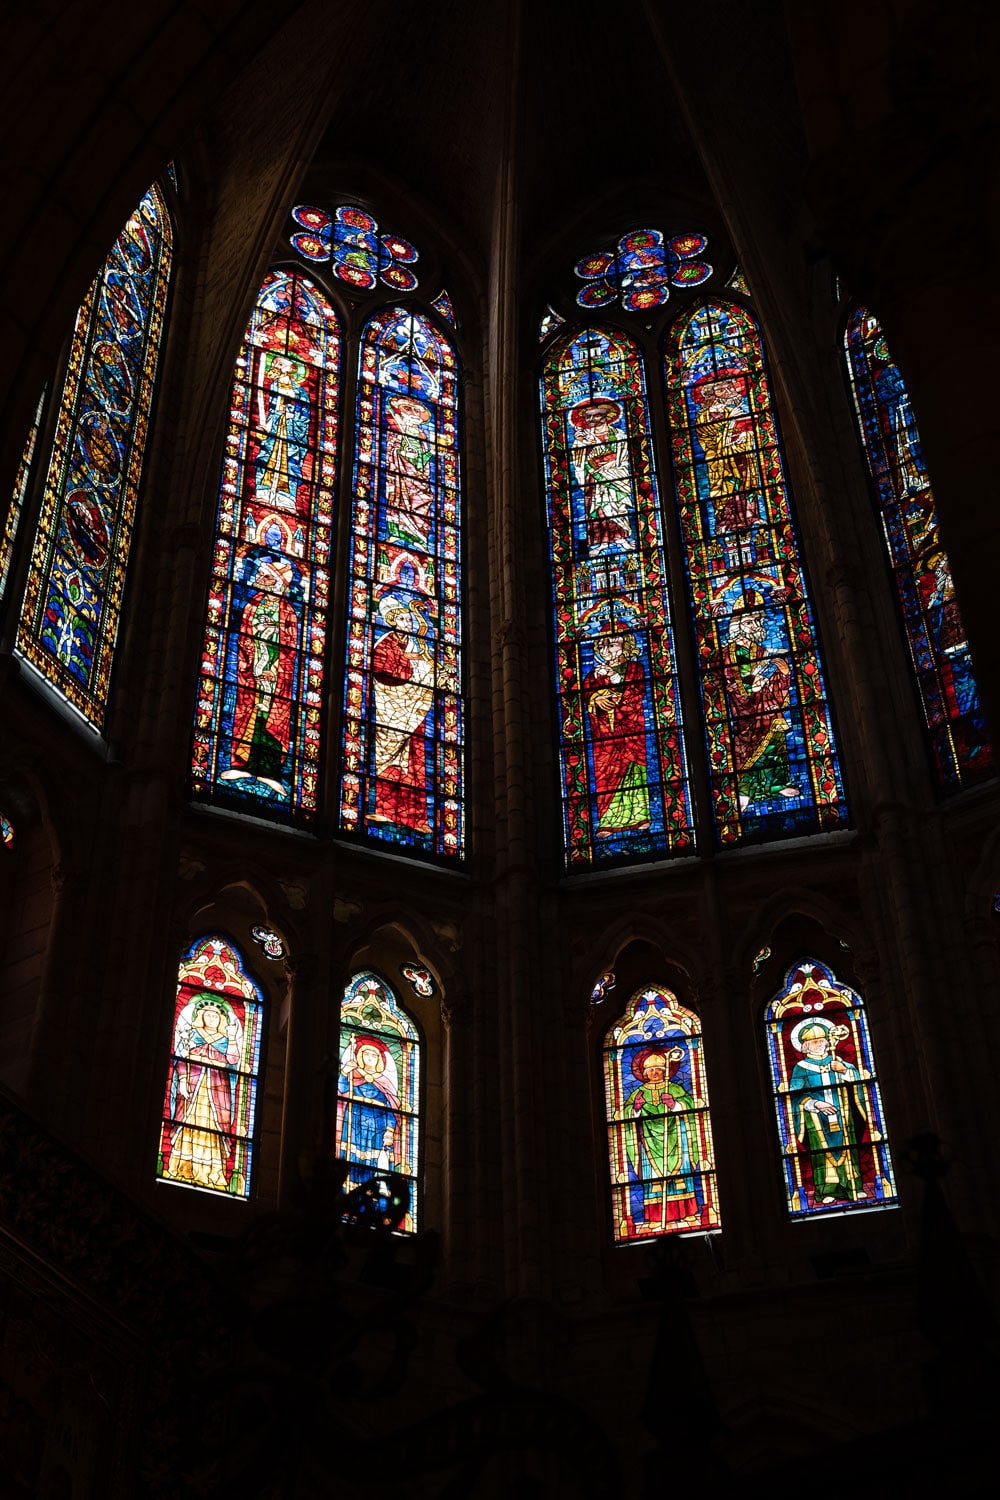 Stunning stained glass windows